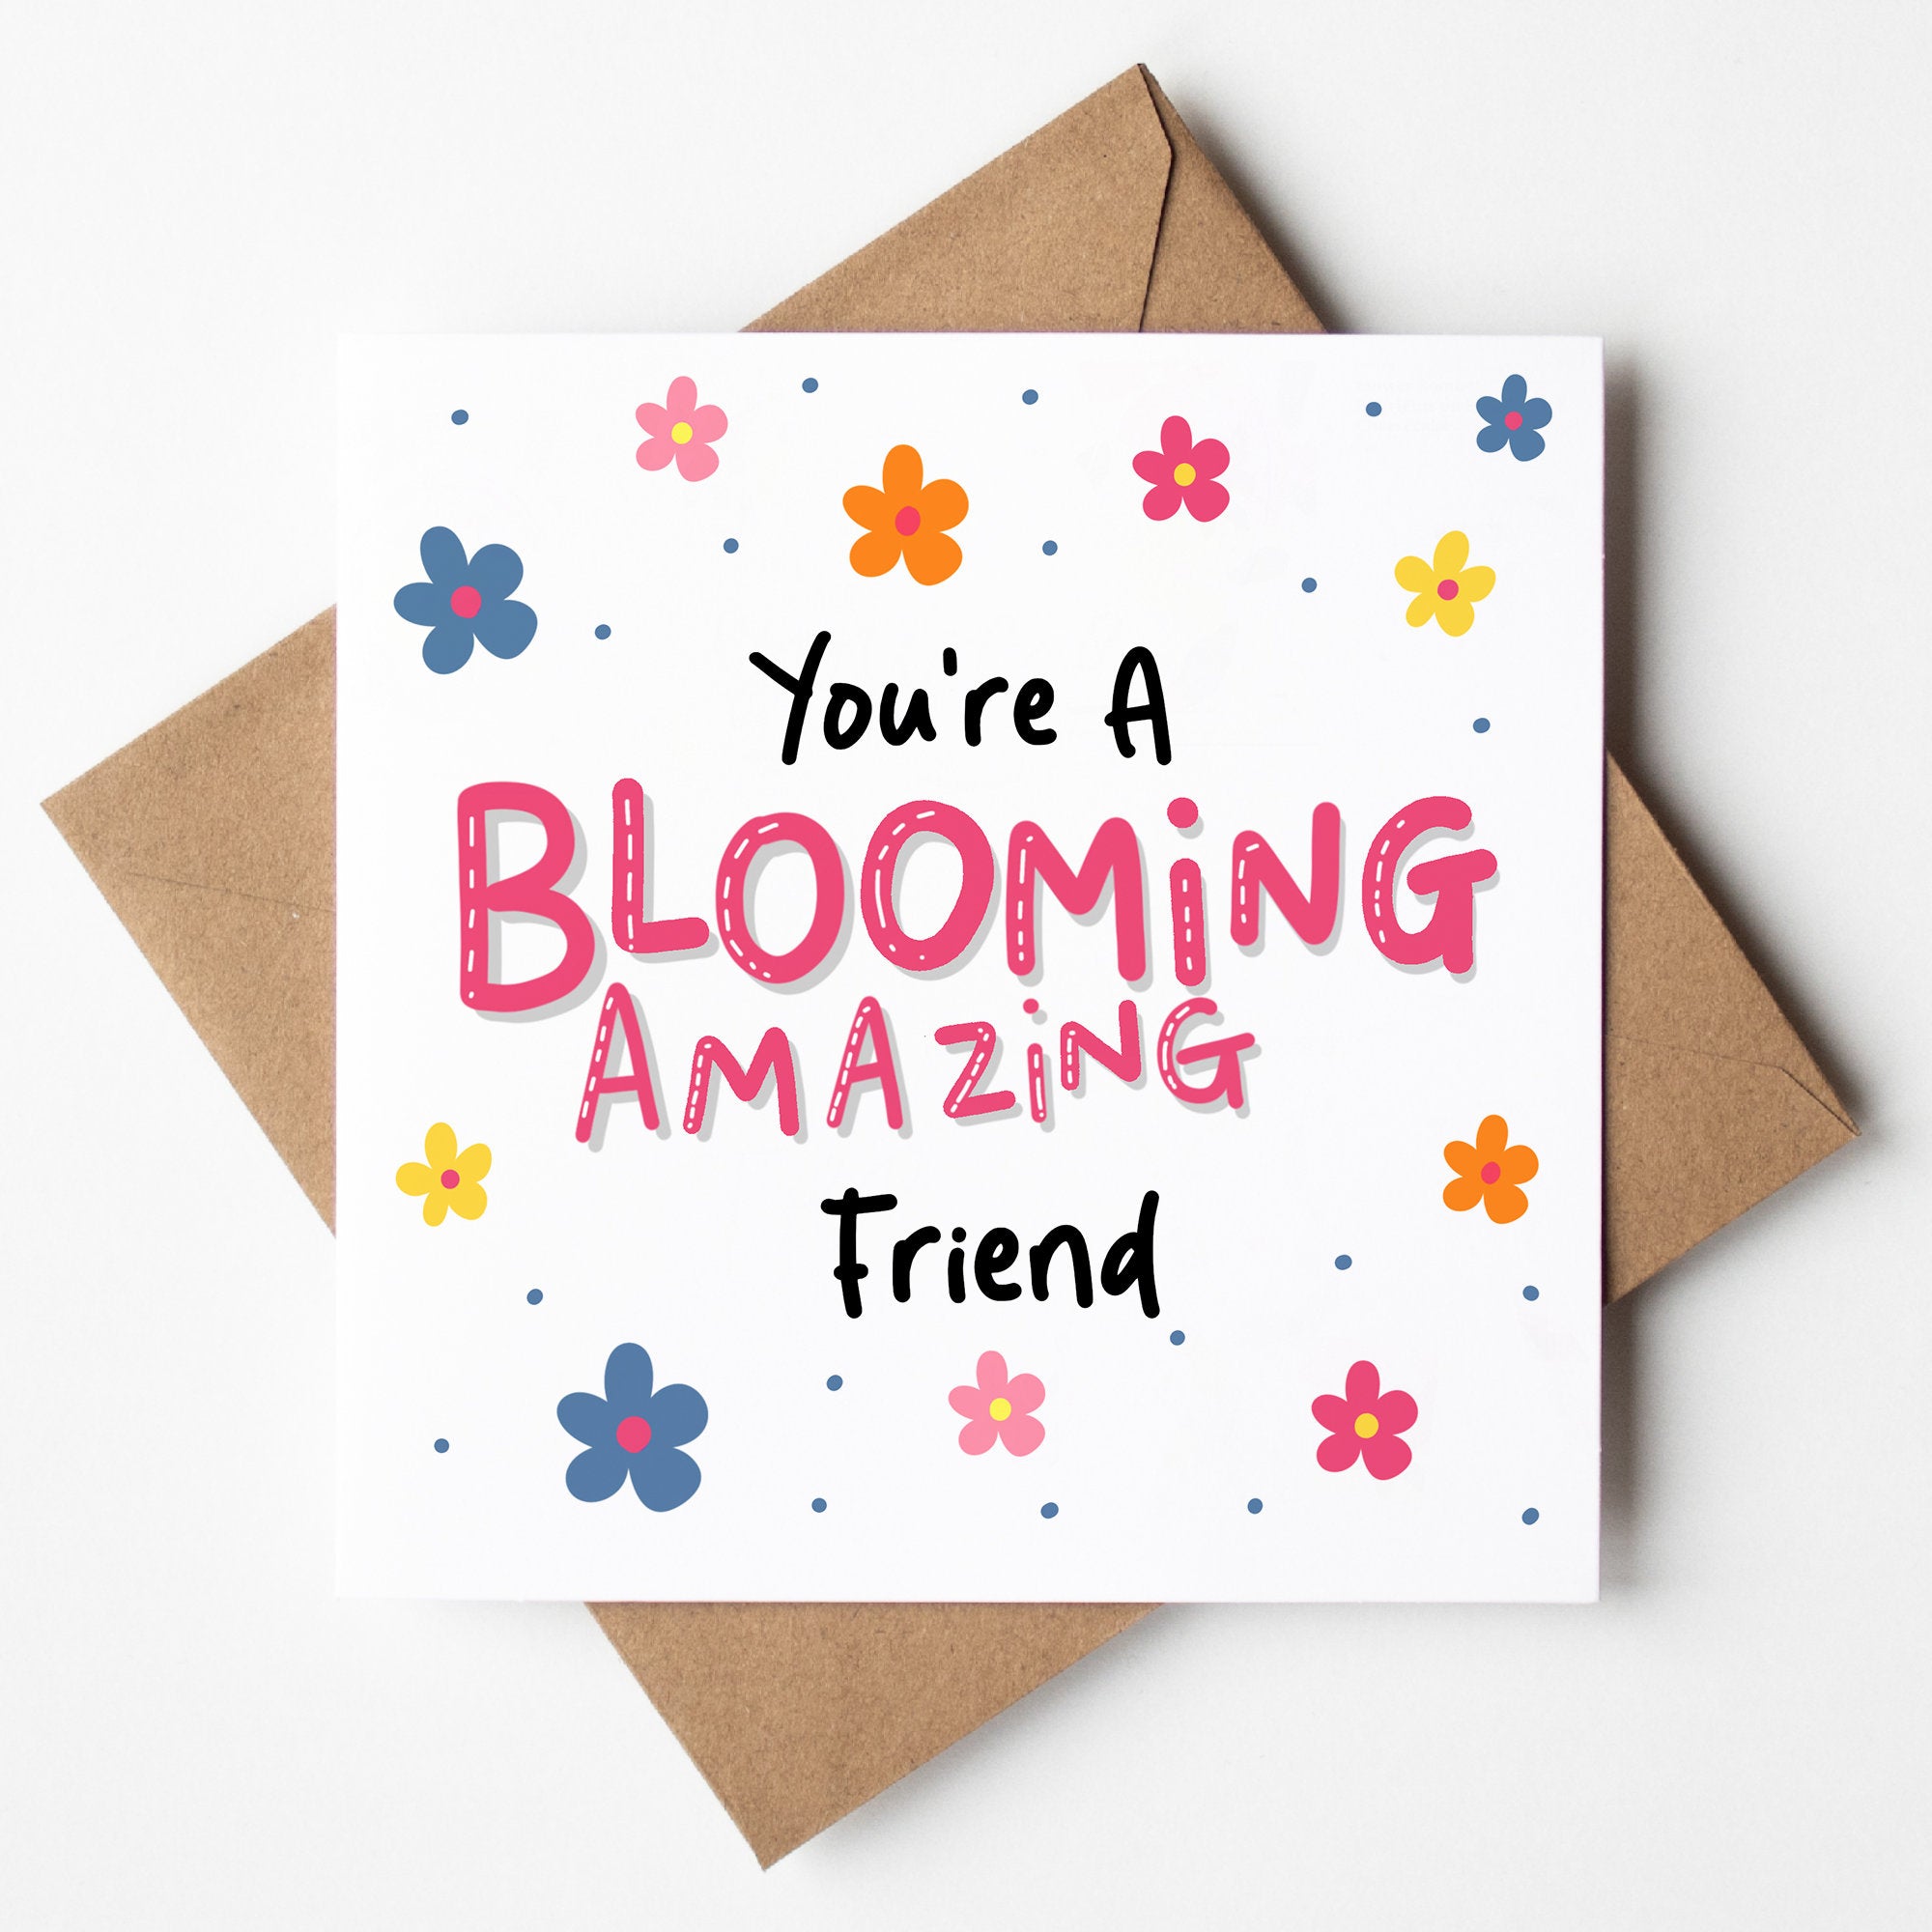 You're A Blooming Amazing Friend Card - Funny Friendship Gift, Thank You Gift, For Best Friend, Positivity, Proud Of You